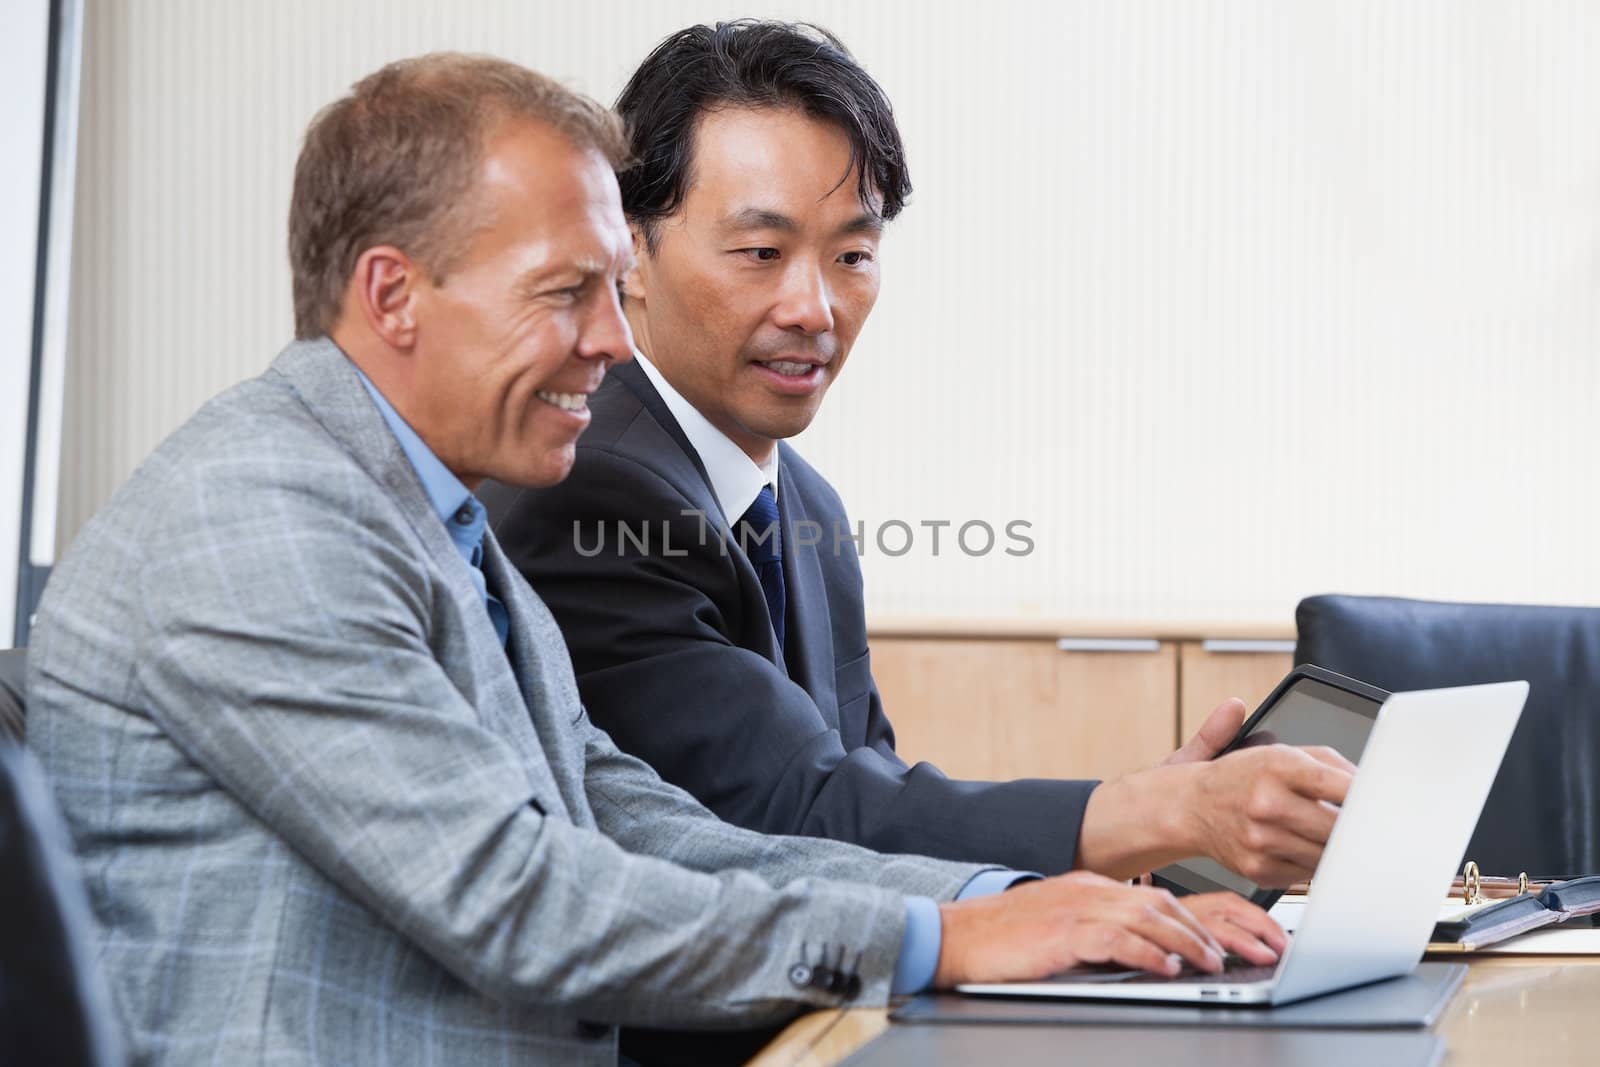 Two multi-ethnic colleagues working together on a computer